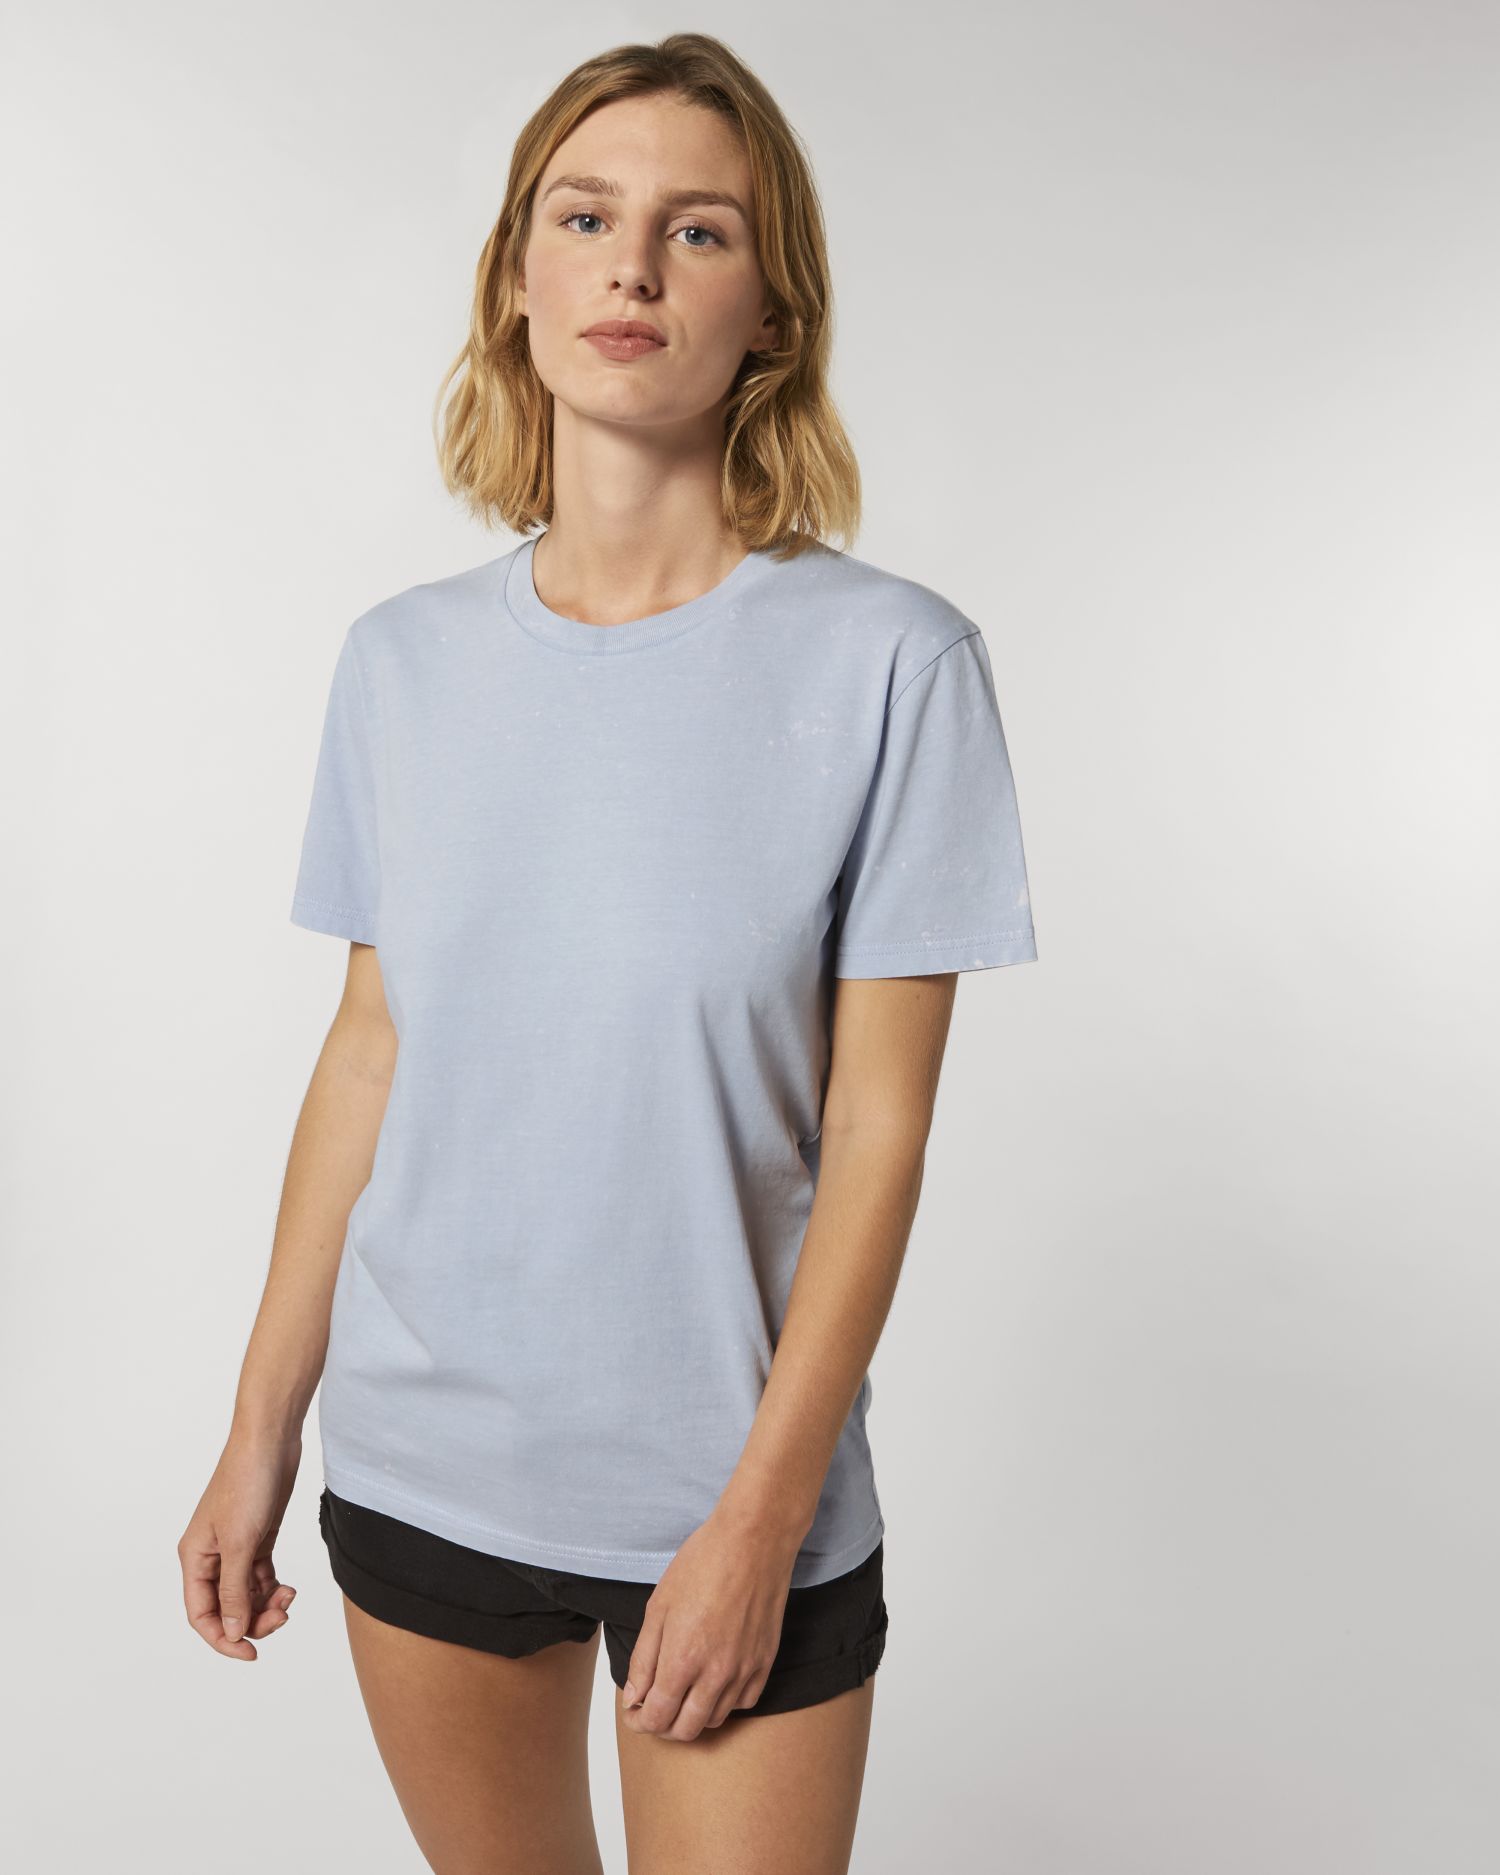 T-Shirt Creator Vintage in Farbe G. Dyed Aged Serene Blue